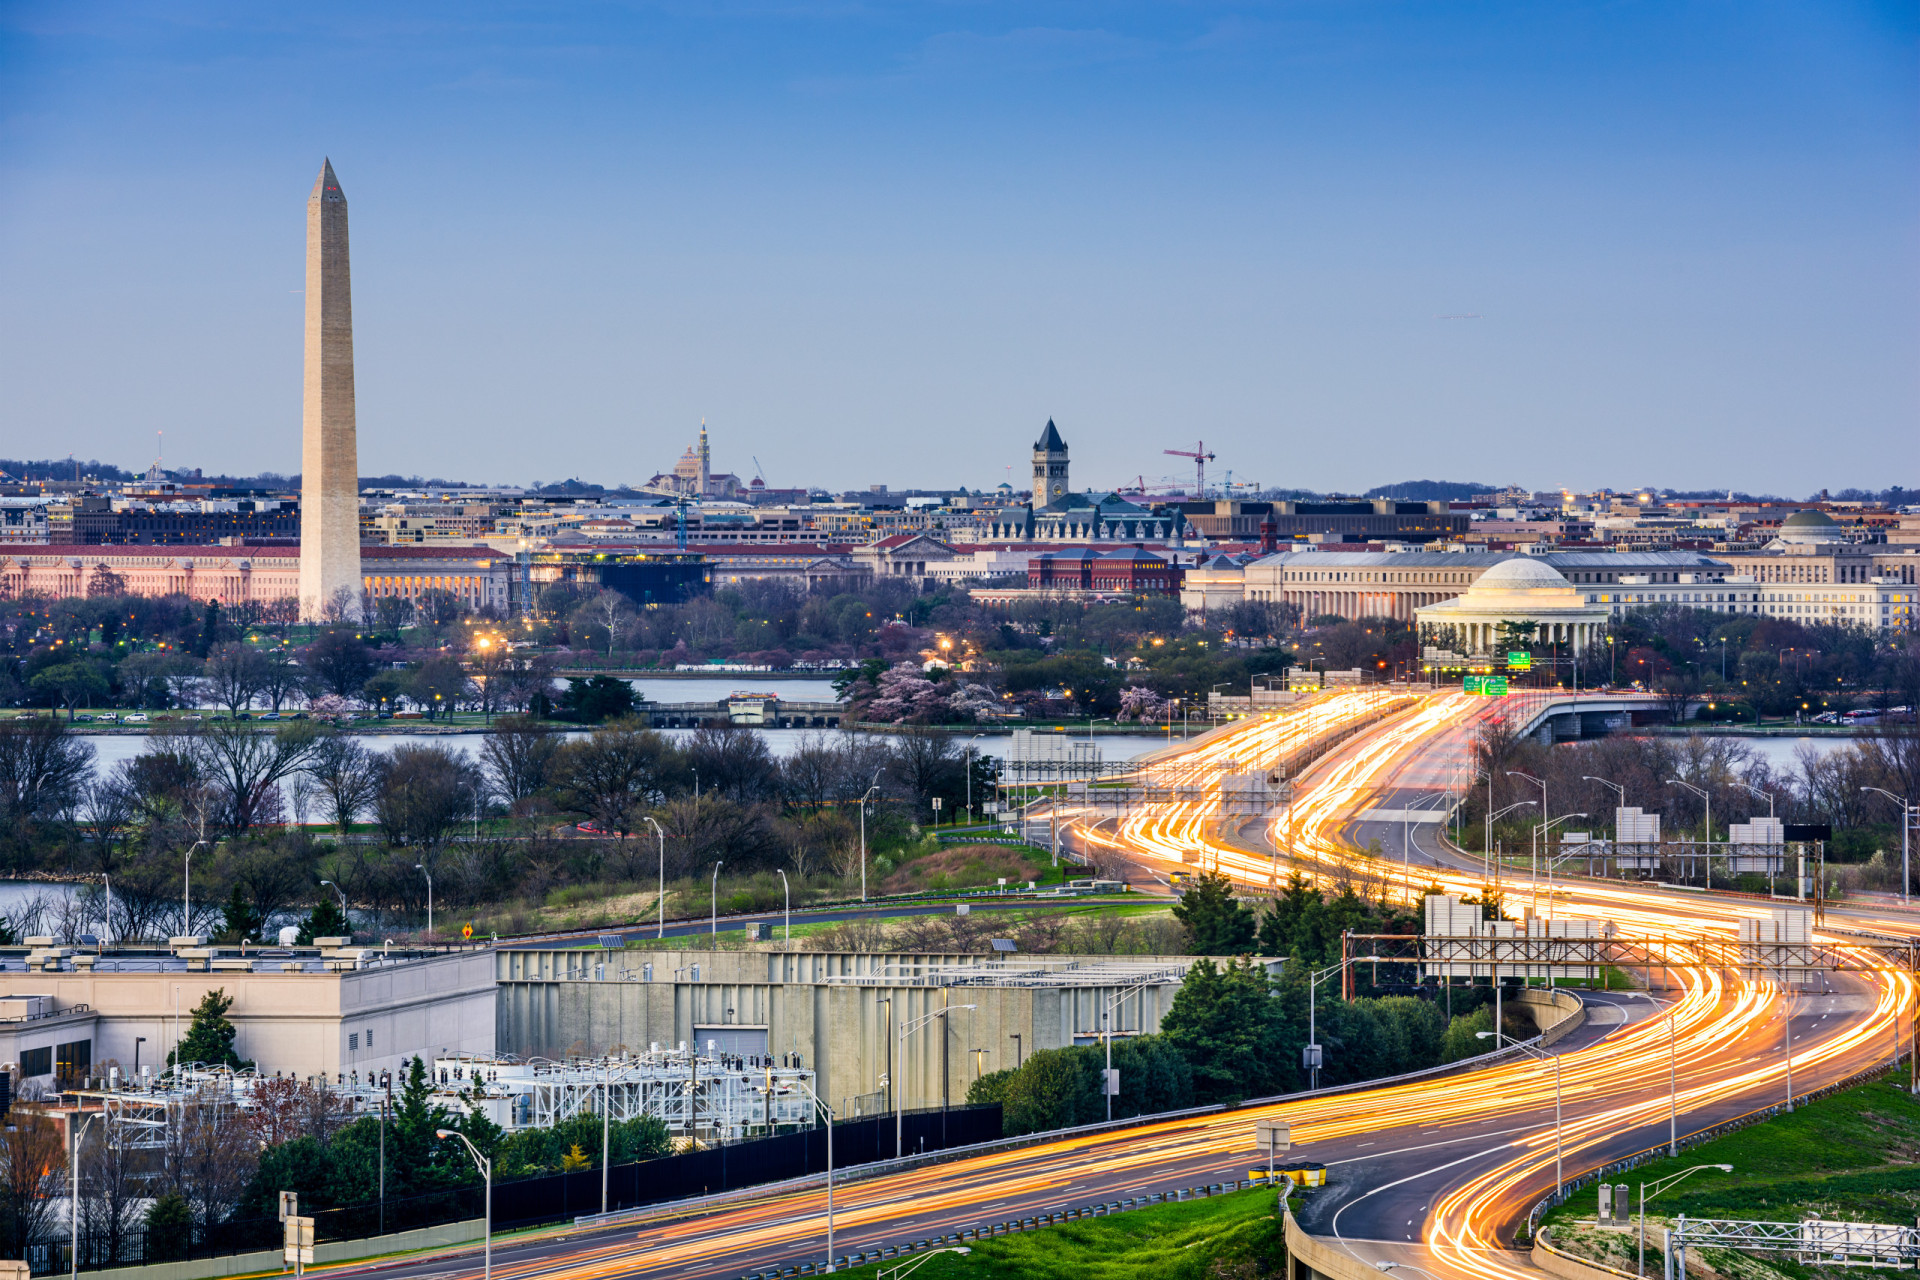 <p>Washington D.C., the nation's capital, scores 70.9 on the rent index. Known for its historical monuments and high living costs, it's a hub of political power and cultural diversity.</p><p><a href="https://www.msn.com/en-in/community/channel/vid-7xx8mnucu55yw63we9va2gwr7uihbxwc68fxqp25x6tg4ftibpra?cvid=94631541bc0f4f89bfd59158d696ad7e">Follow us and access great exclusive content every day</a></p>